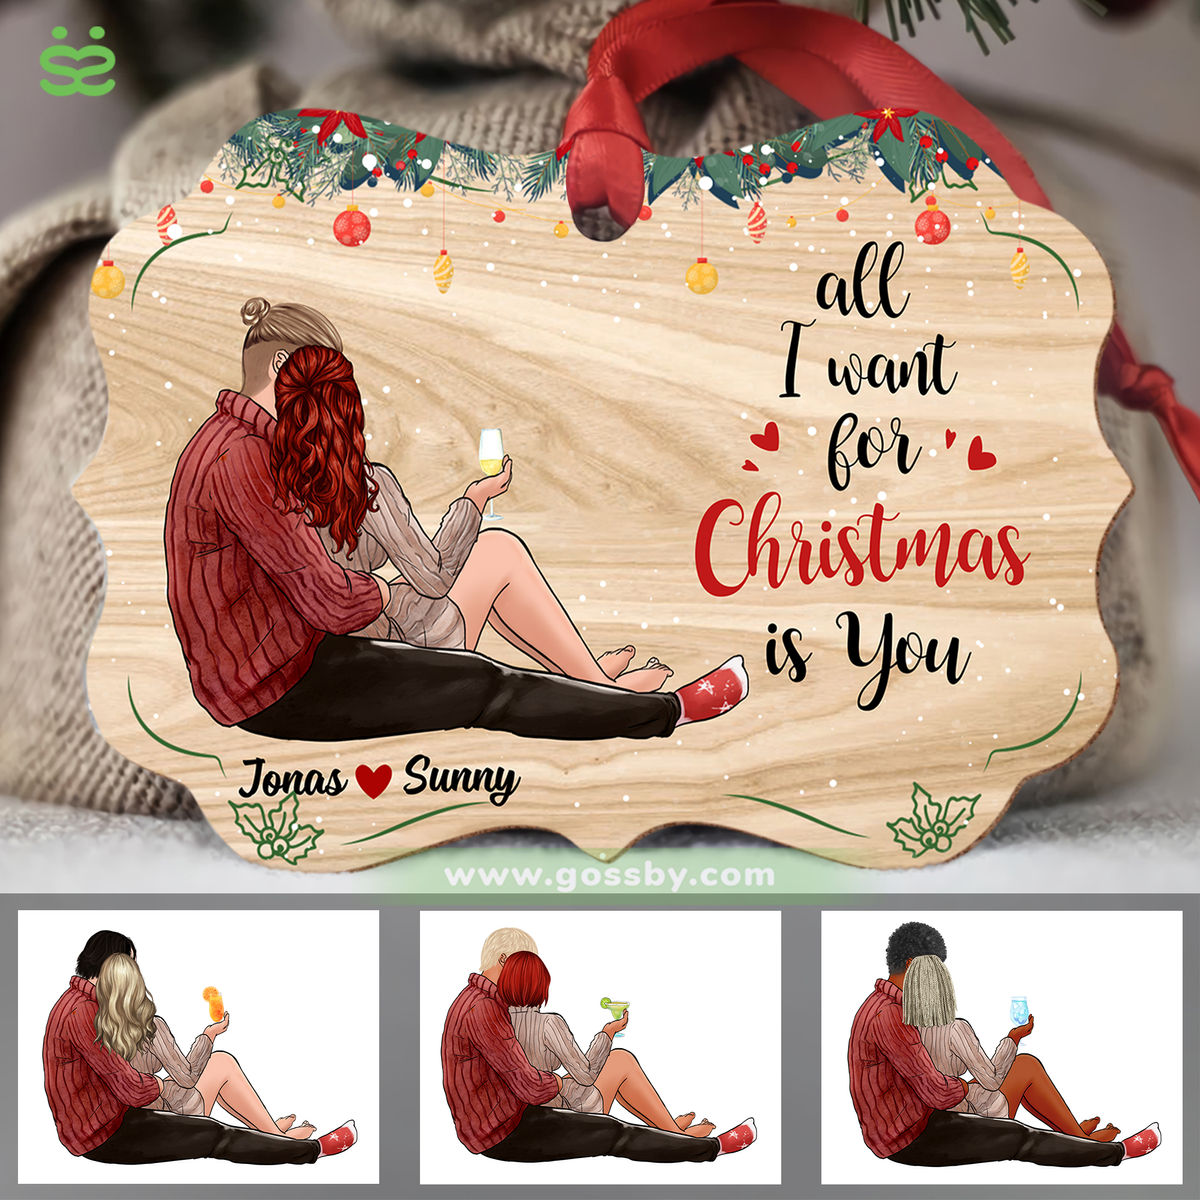 Christmas Gifts - All I want for Christmas is You (G) (Custom Ornament -  Christmas Gifts for Women, Men)